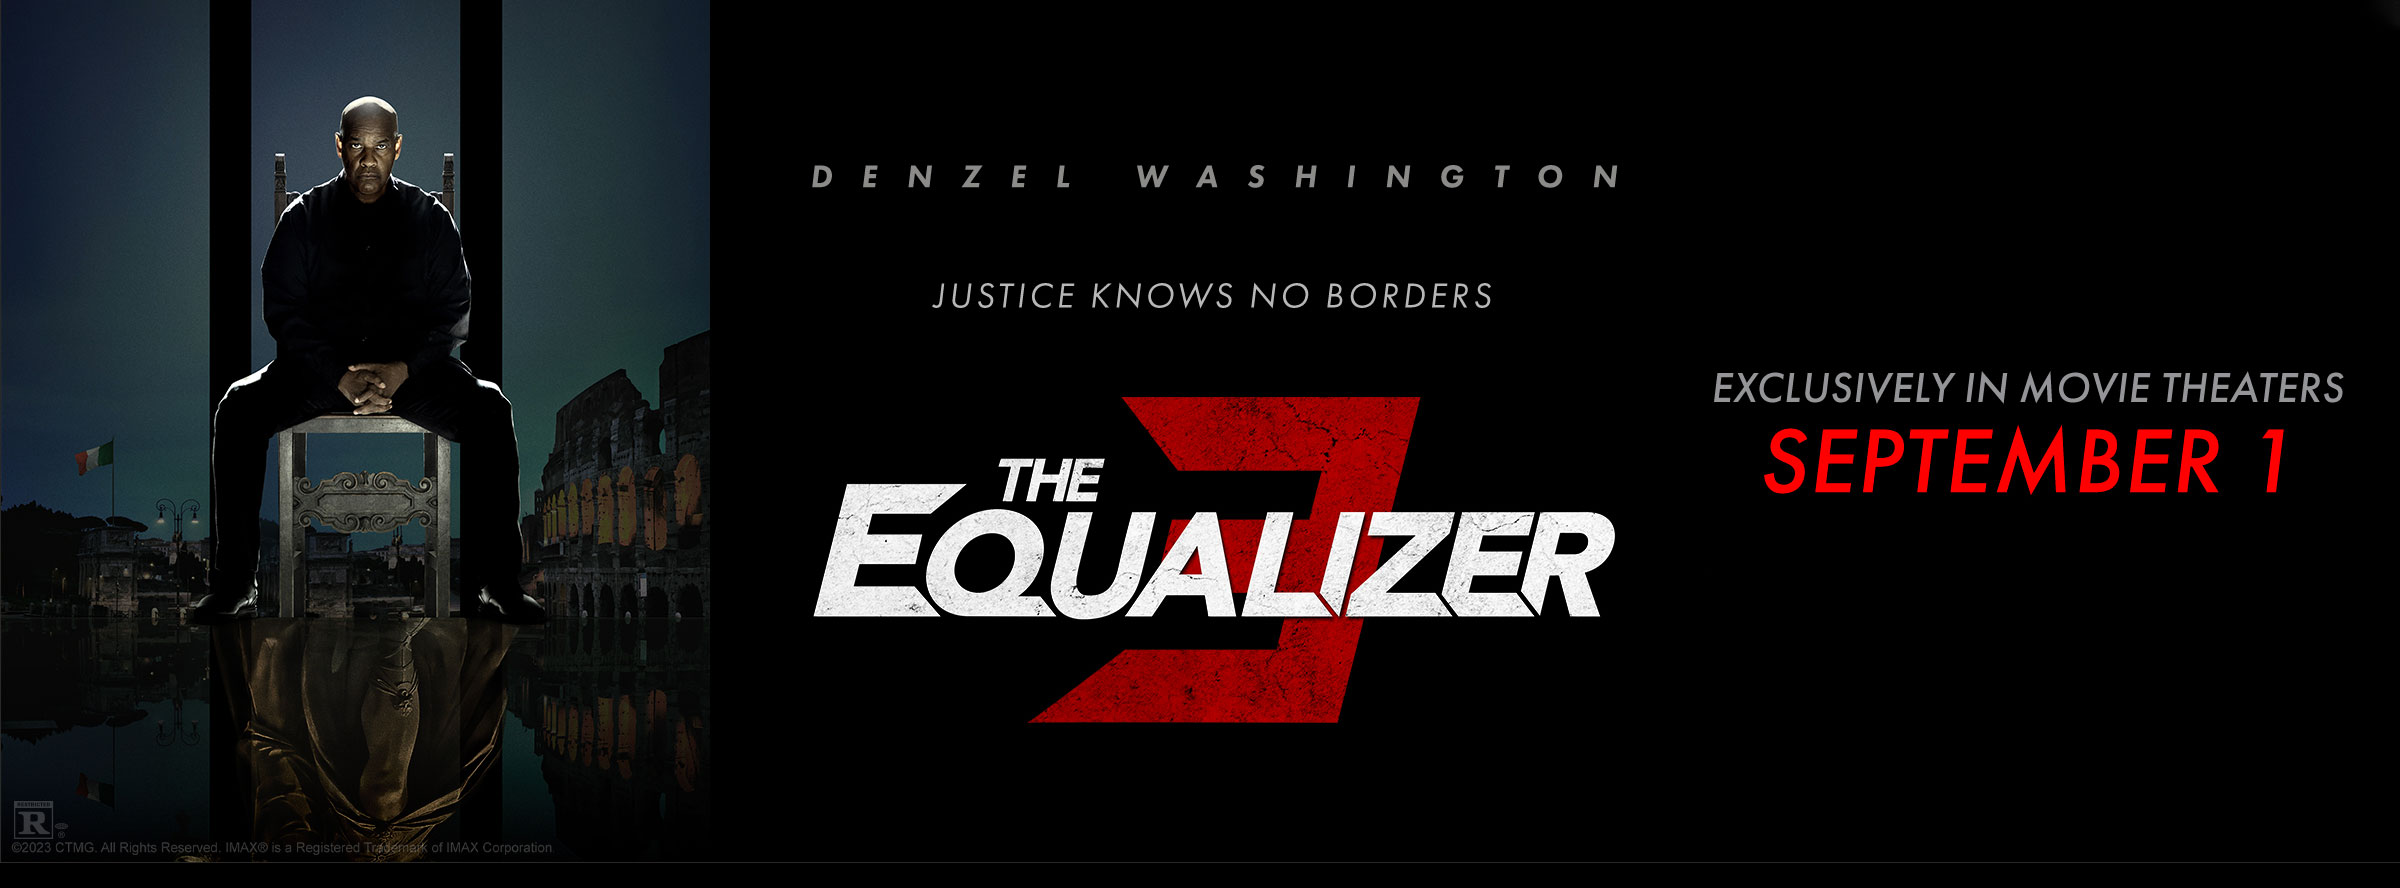 Banner for The Equalizer 3